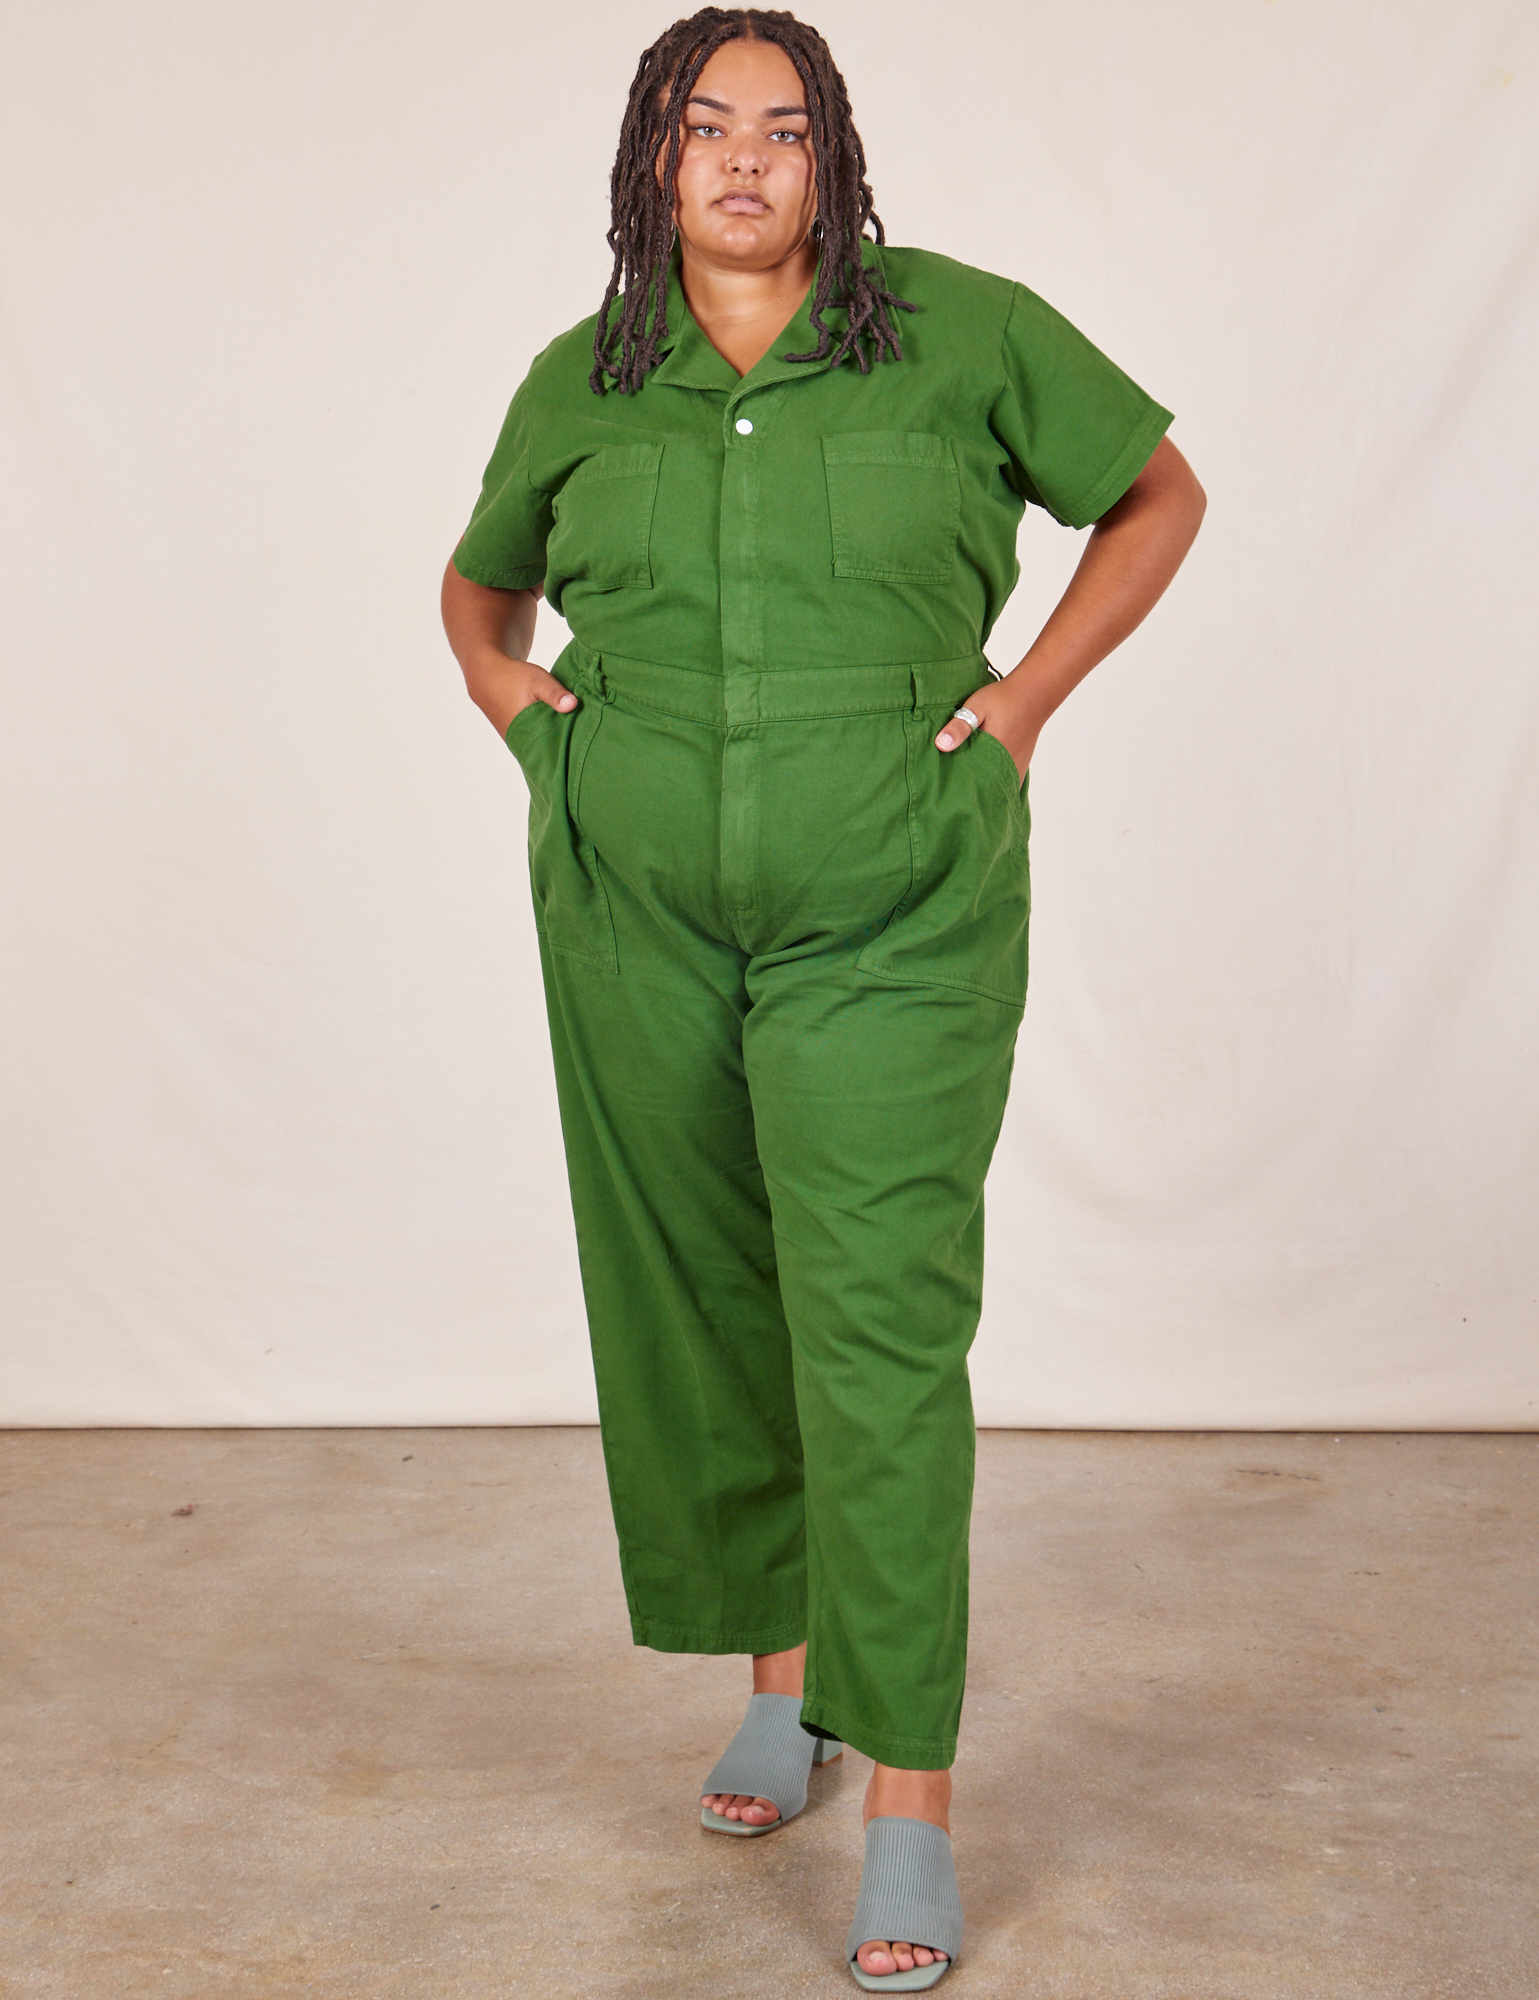 Alicia is 5’9” and wearing 2XL Short Sleeve Jumpsuit in Lawn Green